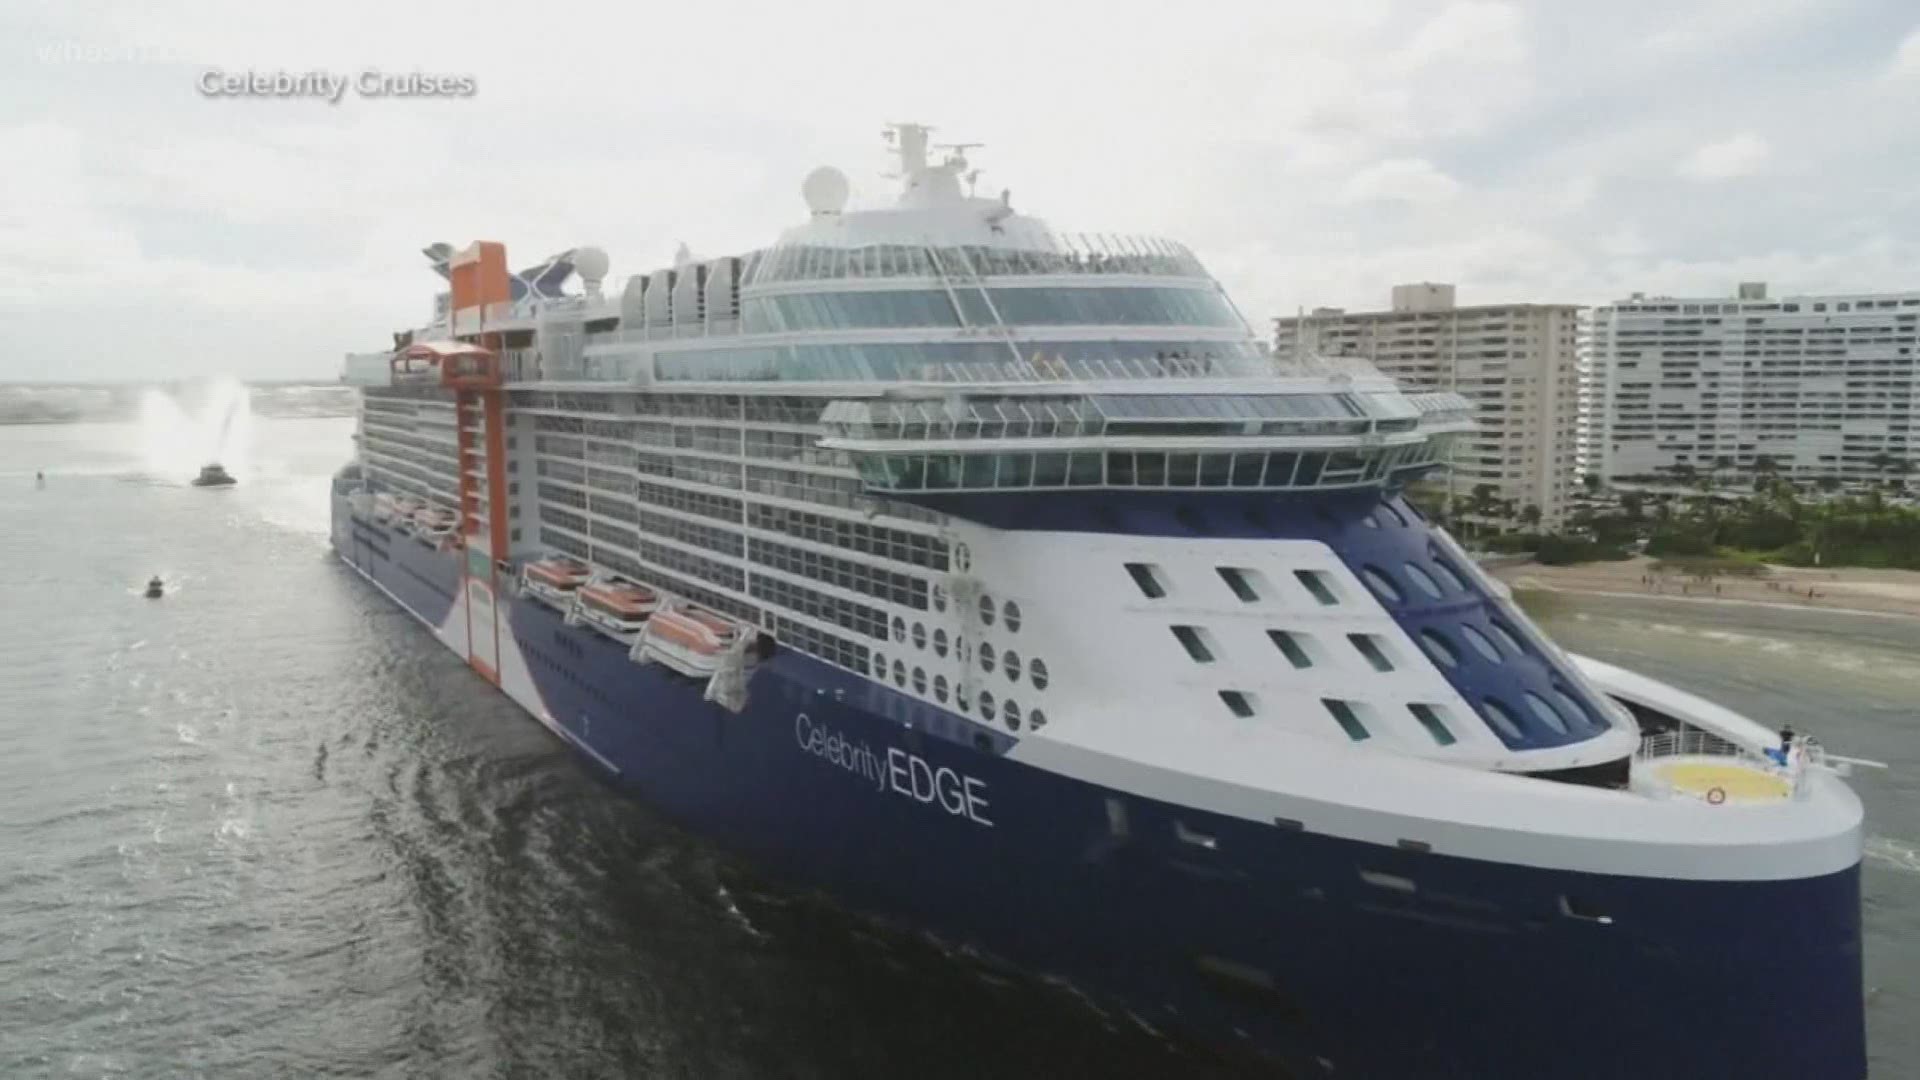 Celebrity Edge will depart Fort Lauderdale, Florida, Saturday evening with the number of passengers limited to 40 percent capacity